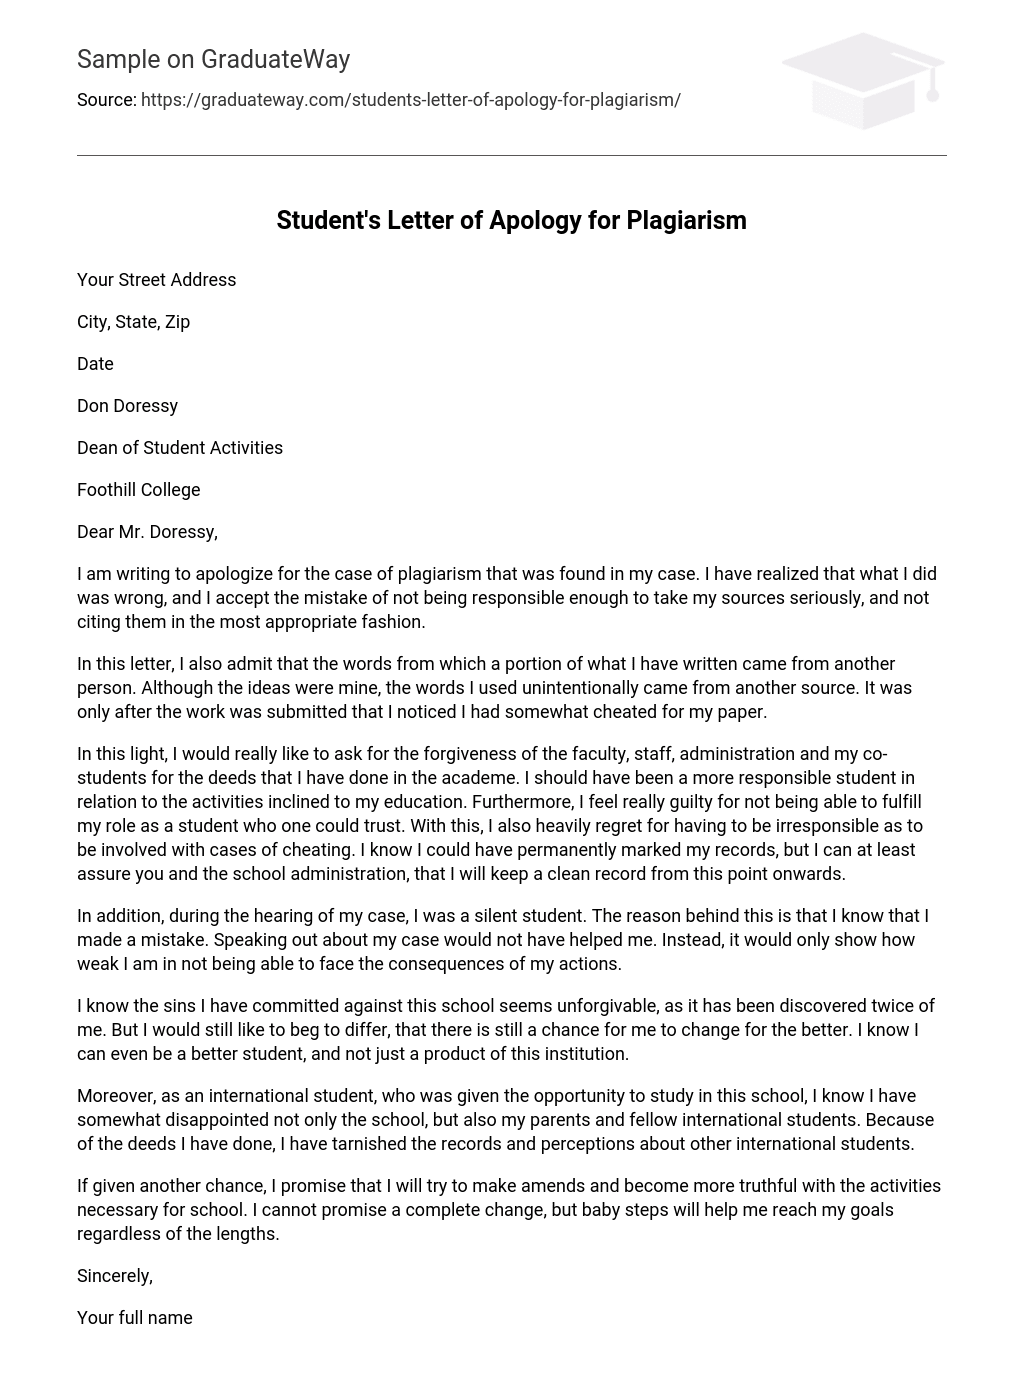 Student’s Letter of Apology for Plagiarism